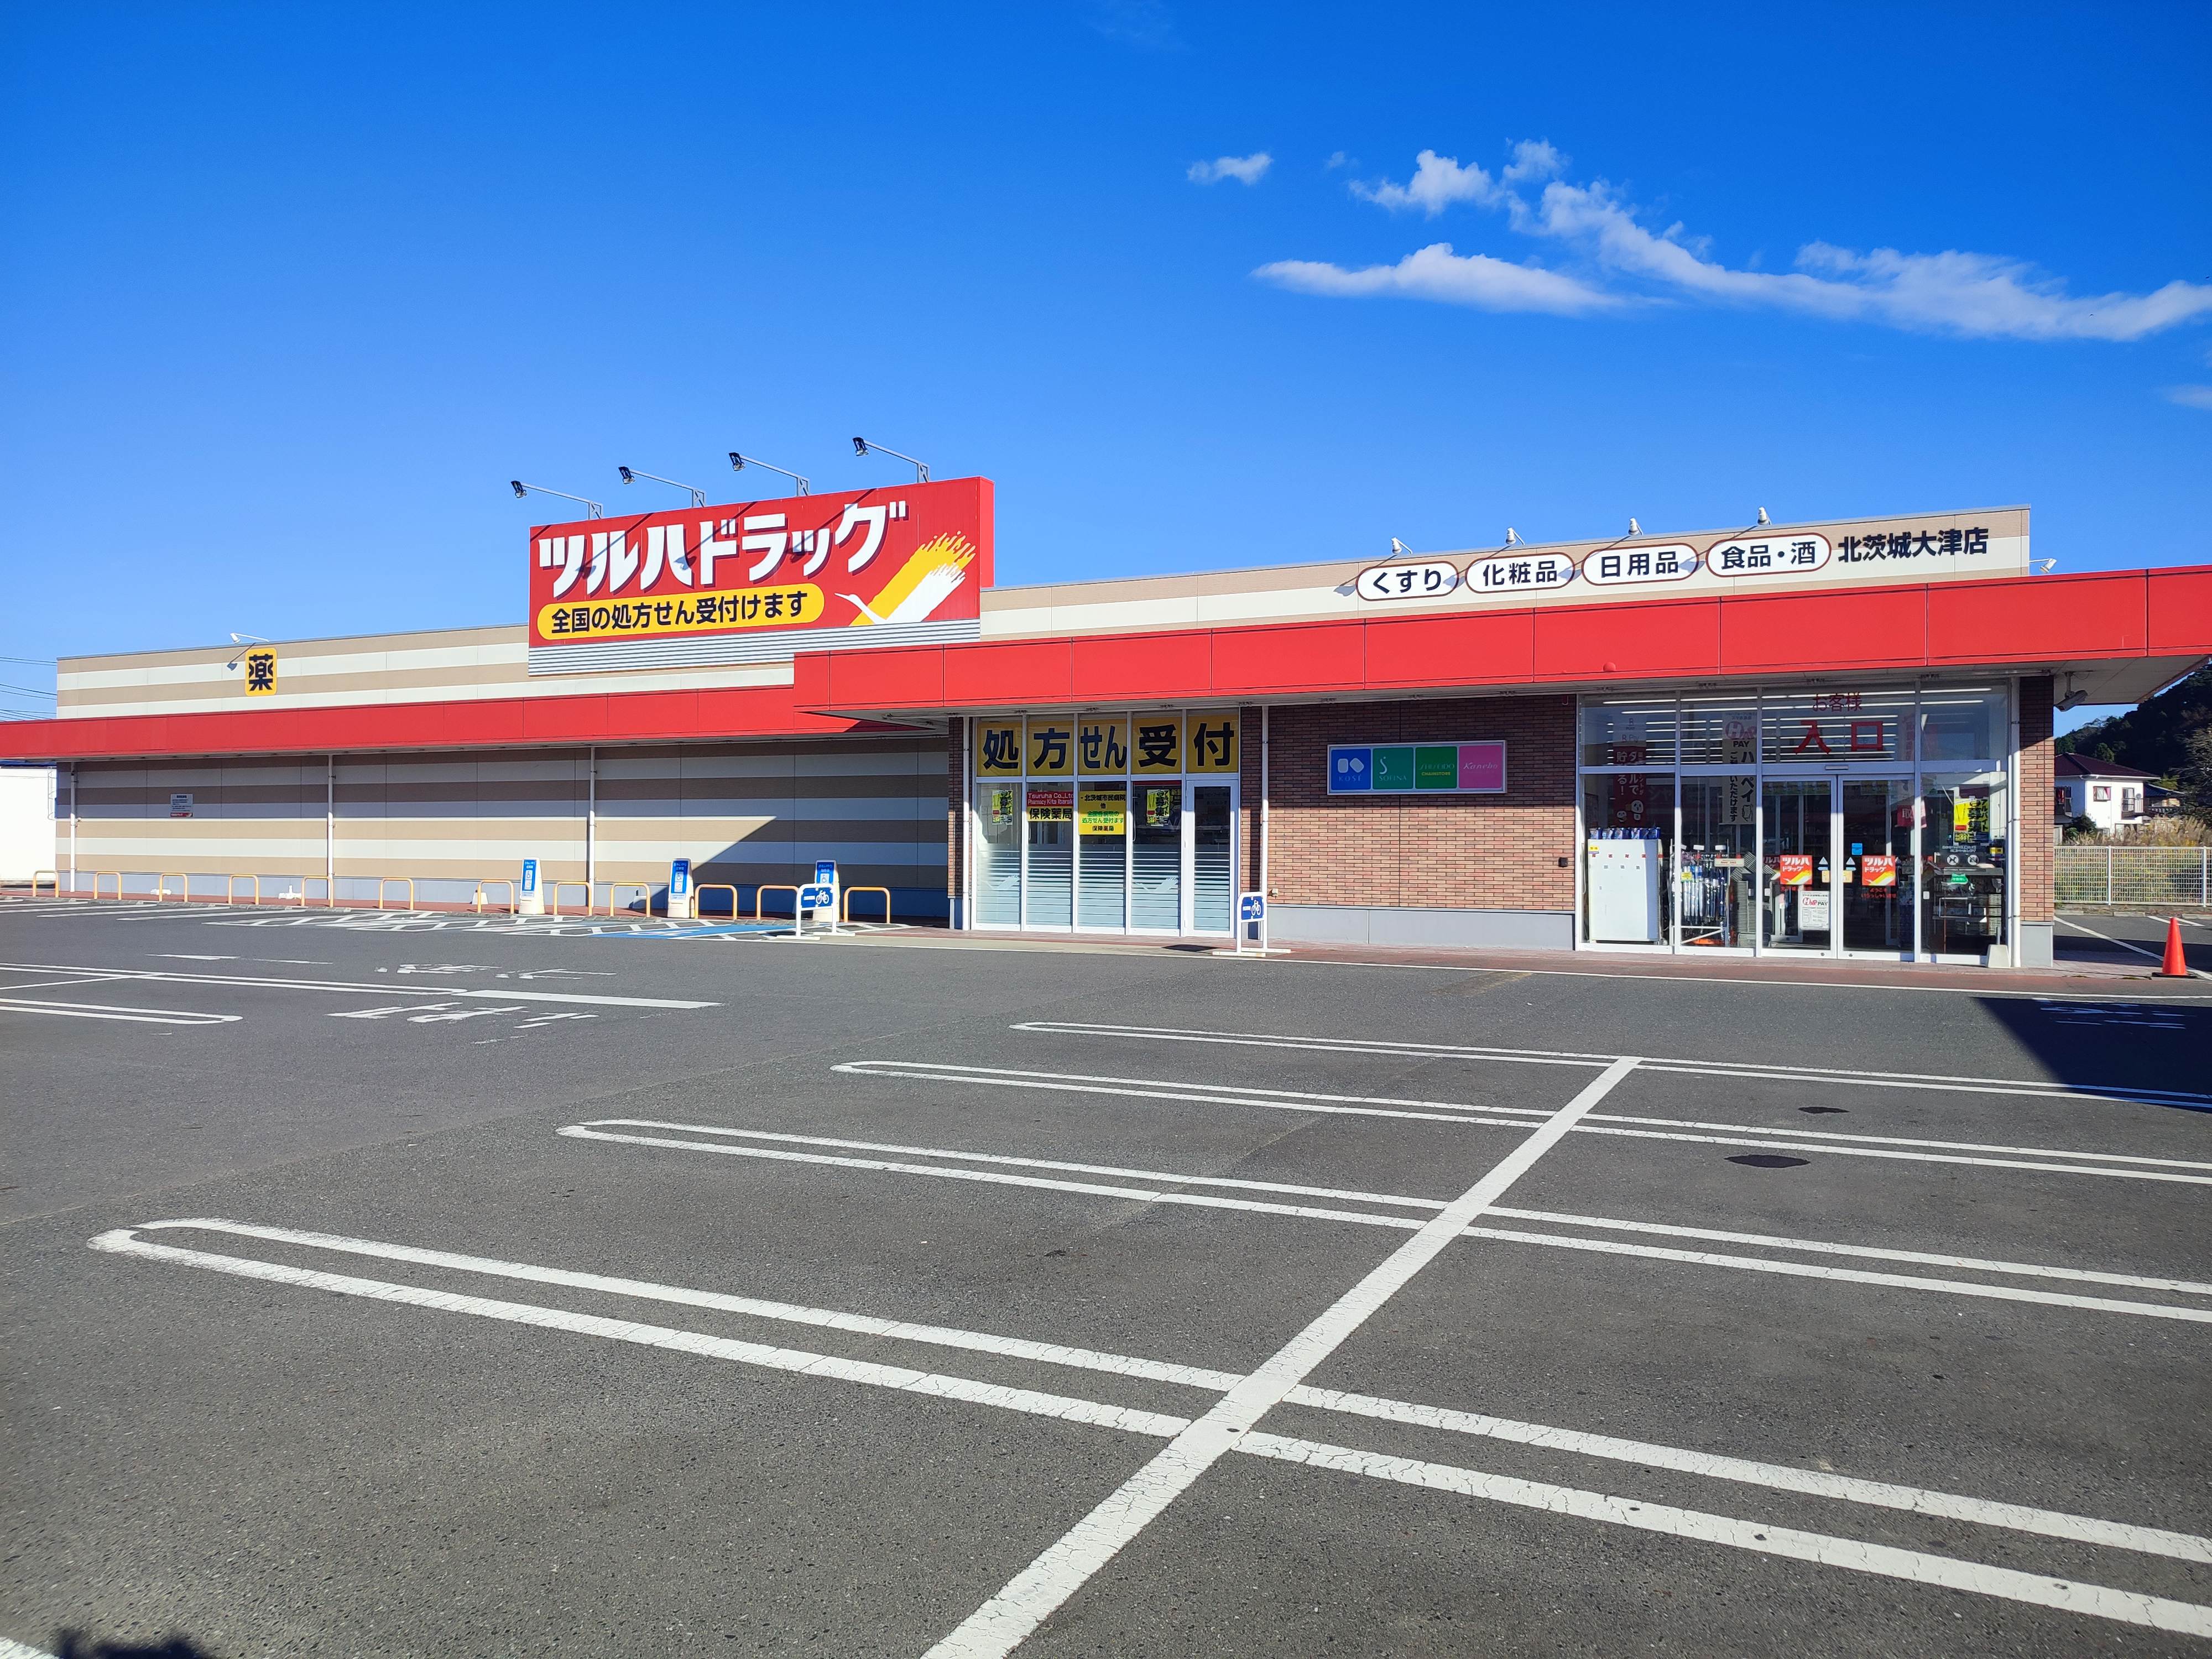 Images ツルハドラッグ 北茨城大津店